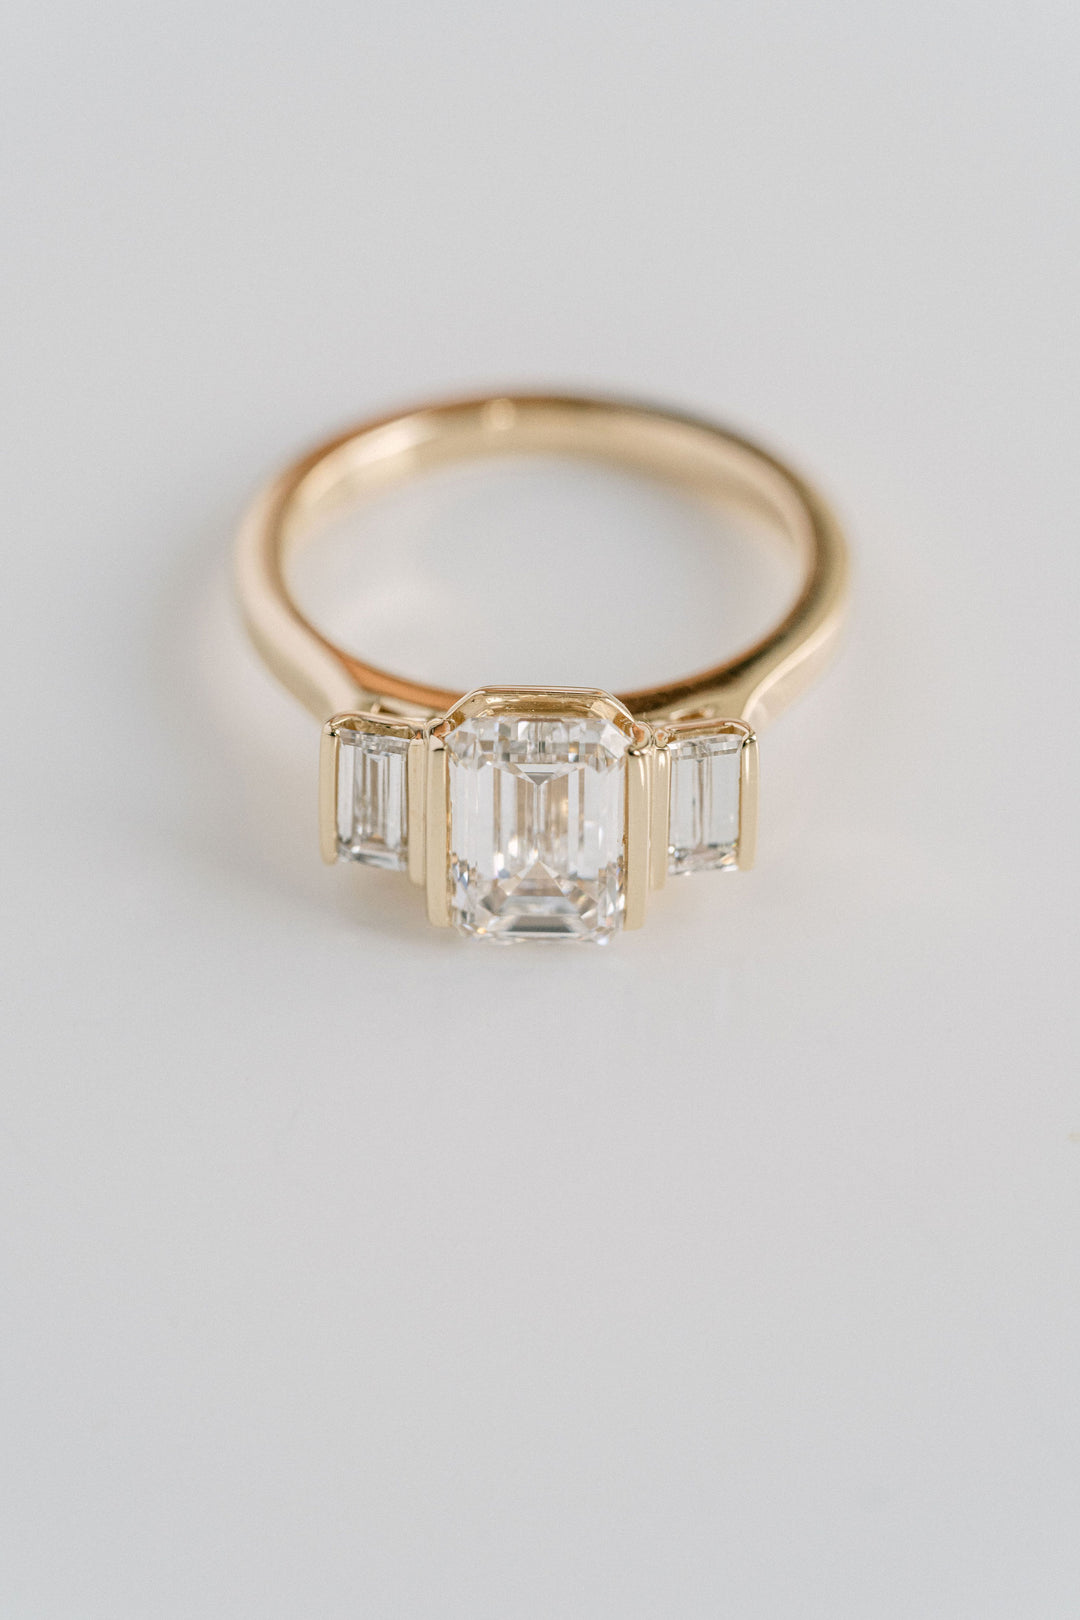 Emerald Cut Diamond Engagement Ring With Emerald Cut Accents Bar Set, 14k Yellow Gold